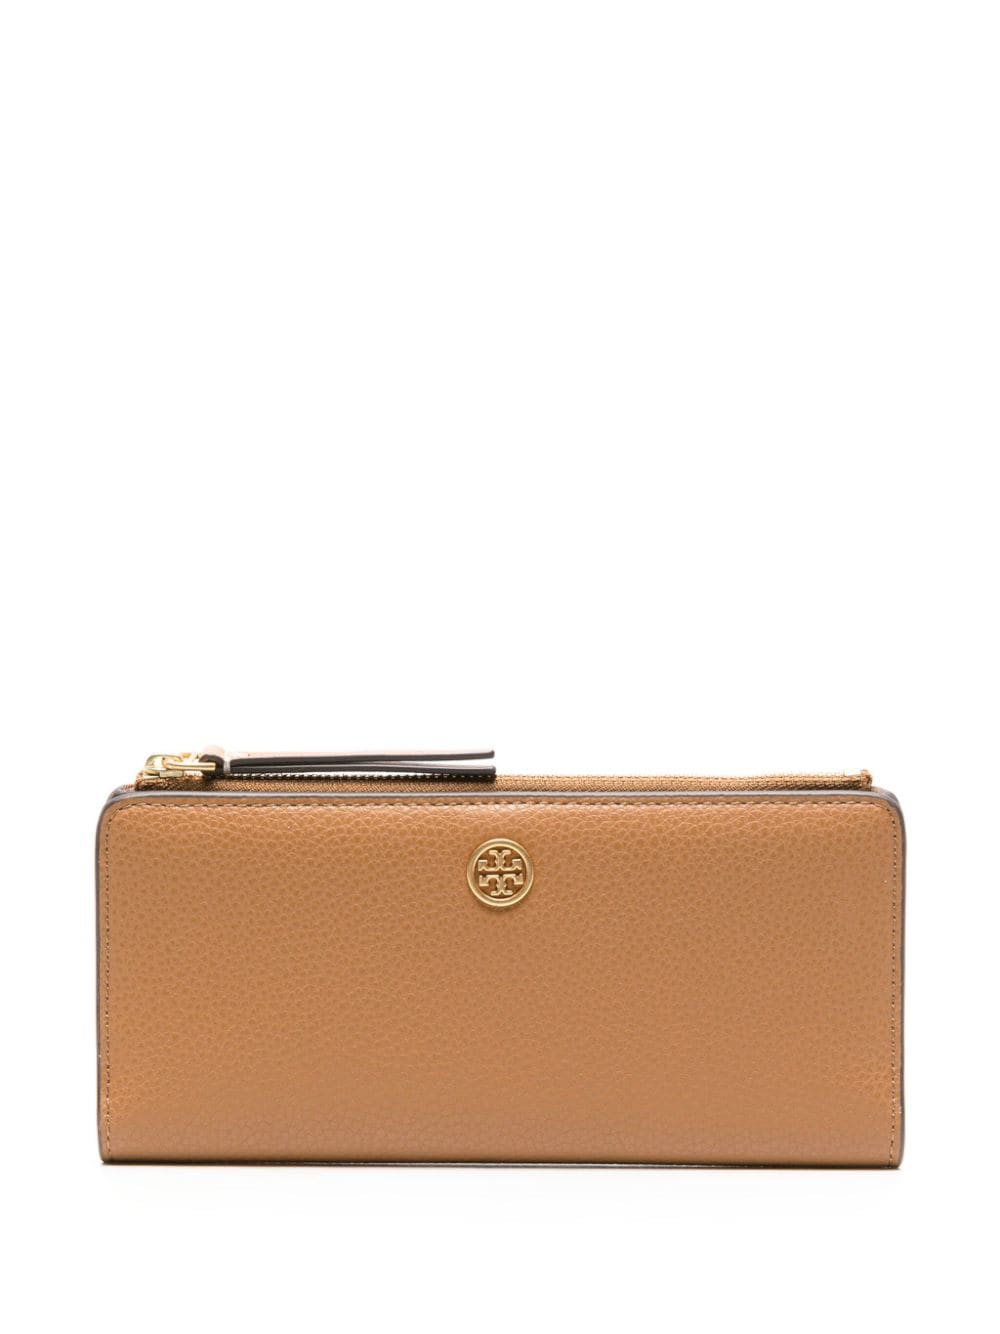 Tory Burch double-T leather wallet - Neutrals von Tory Burch